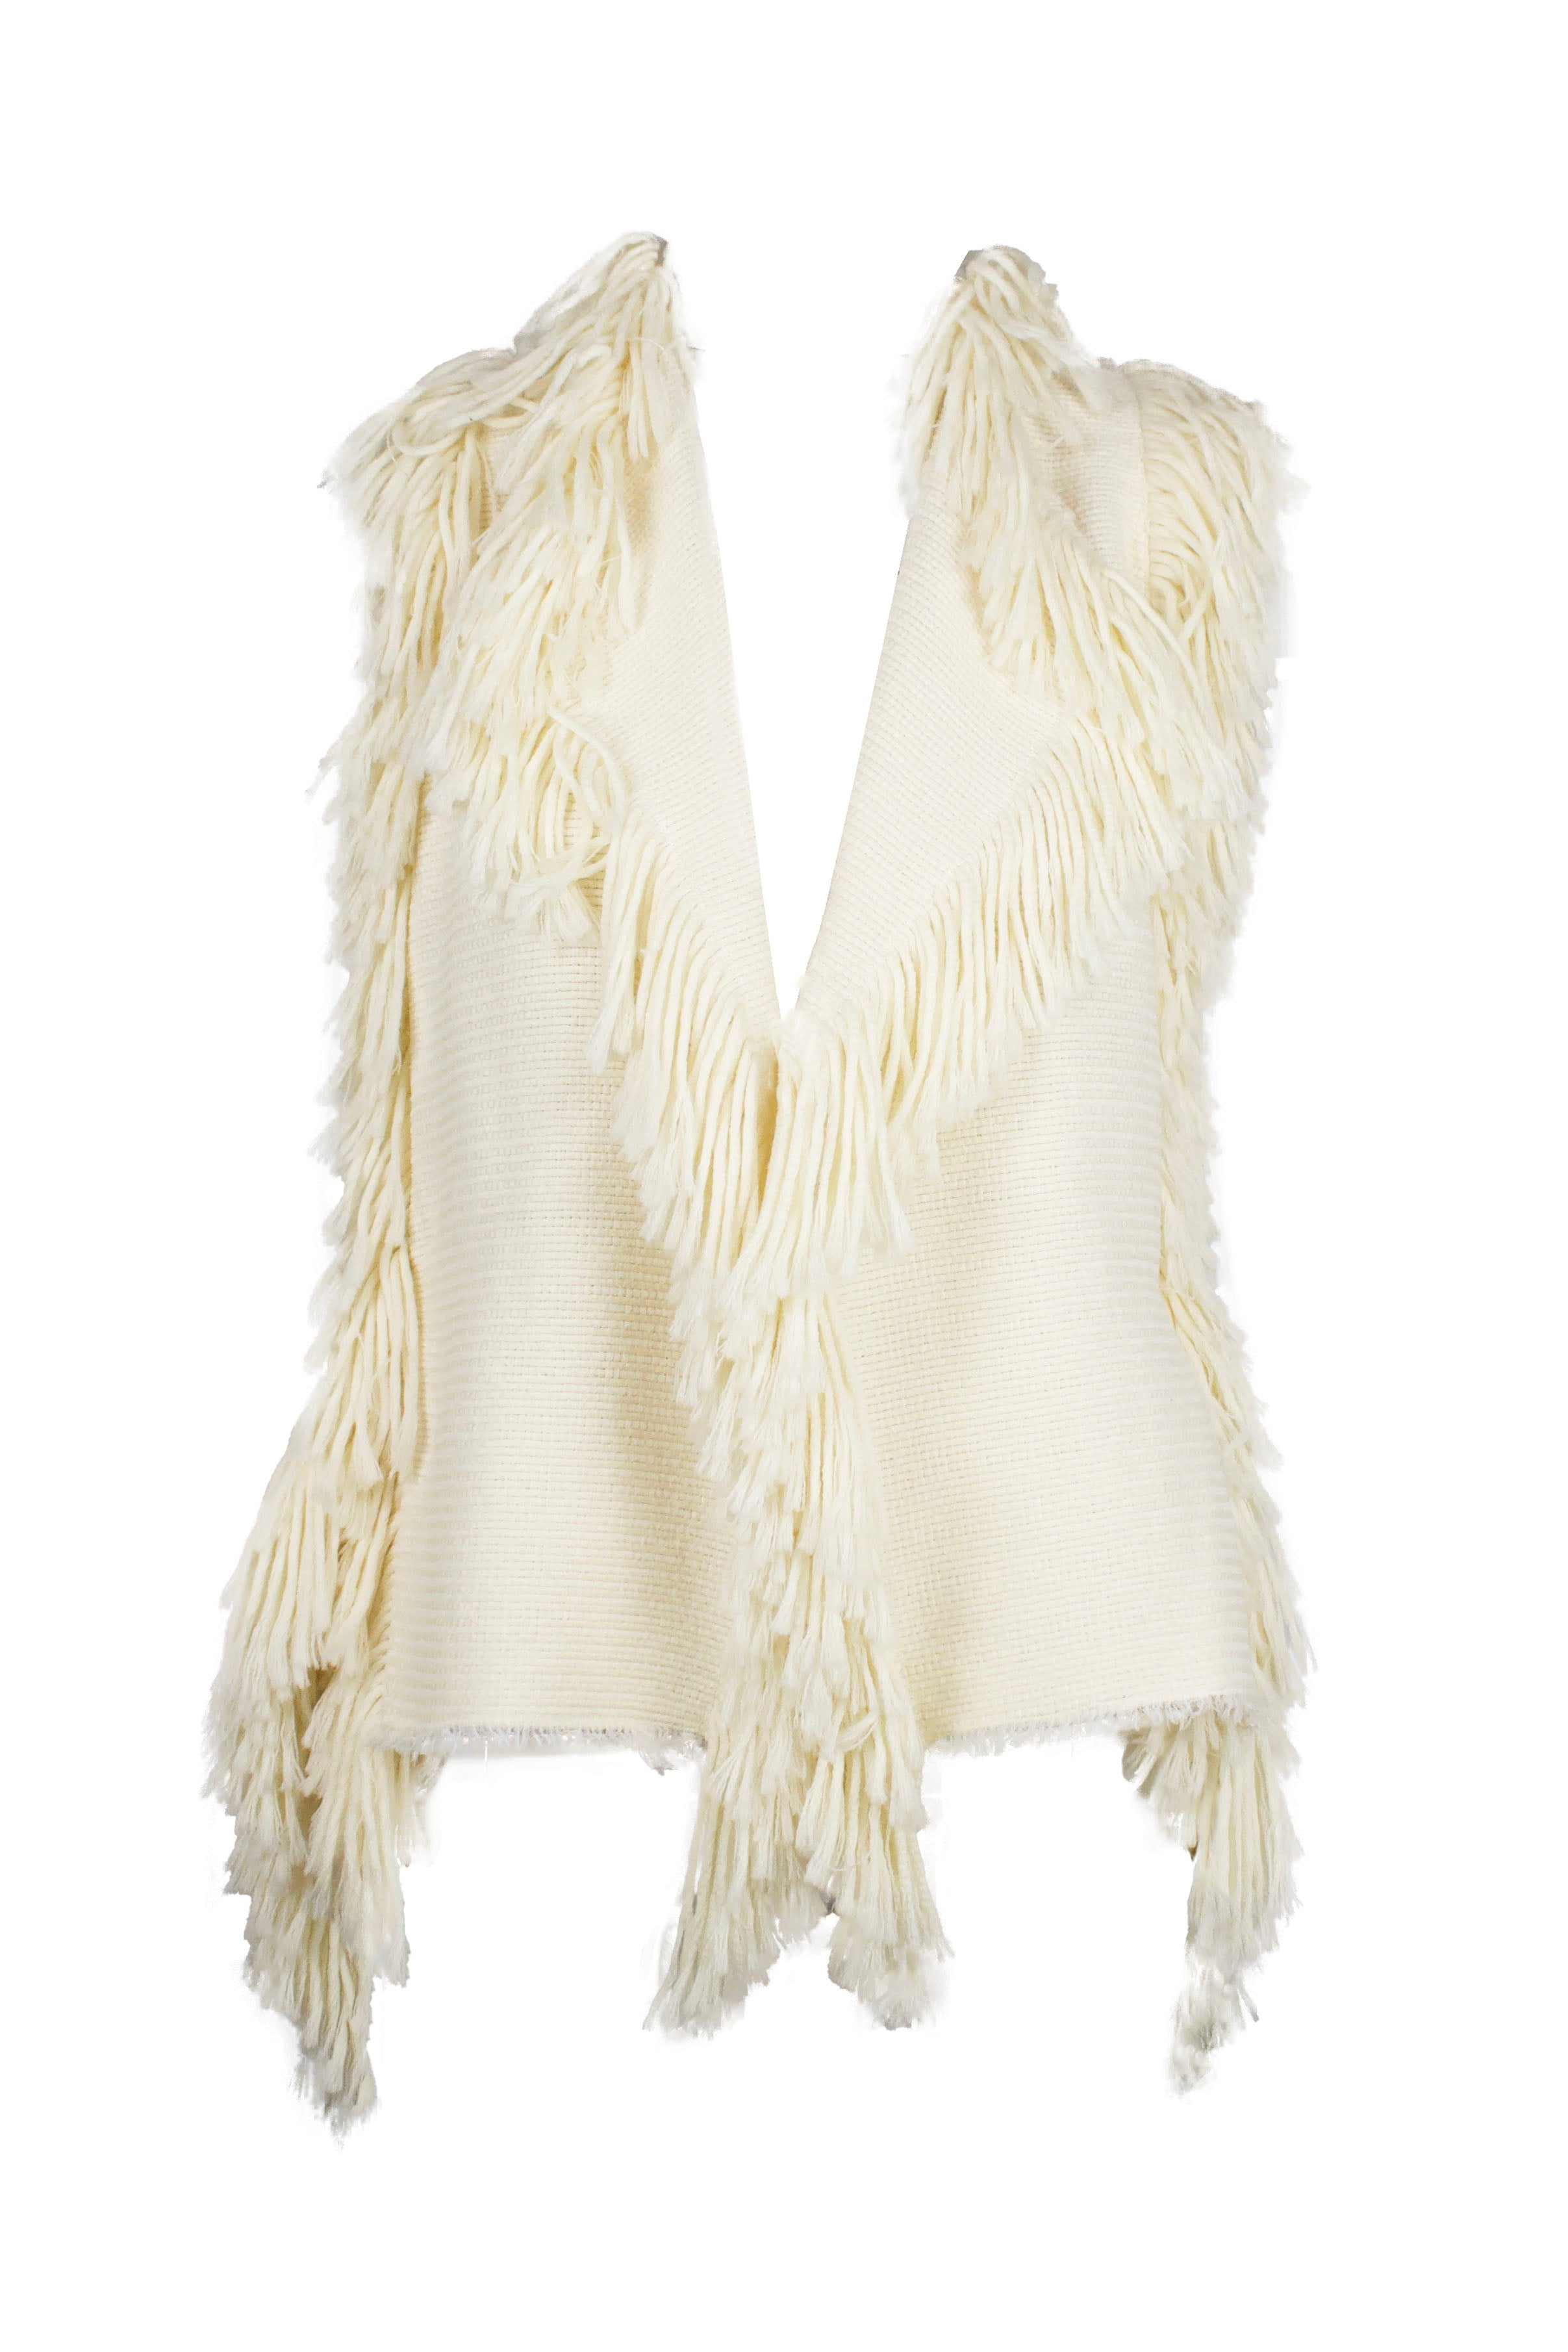 front of lanvin river 2005 beige knitted fringe vest. features fringe hem throughout center, shoulders, open back, and knitted fabric throughout. 